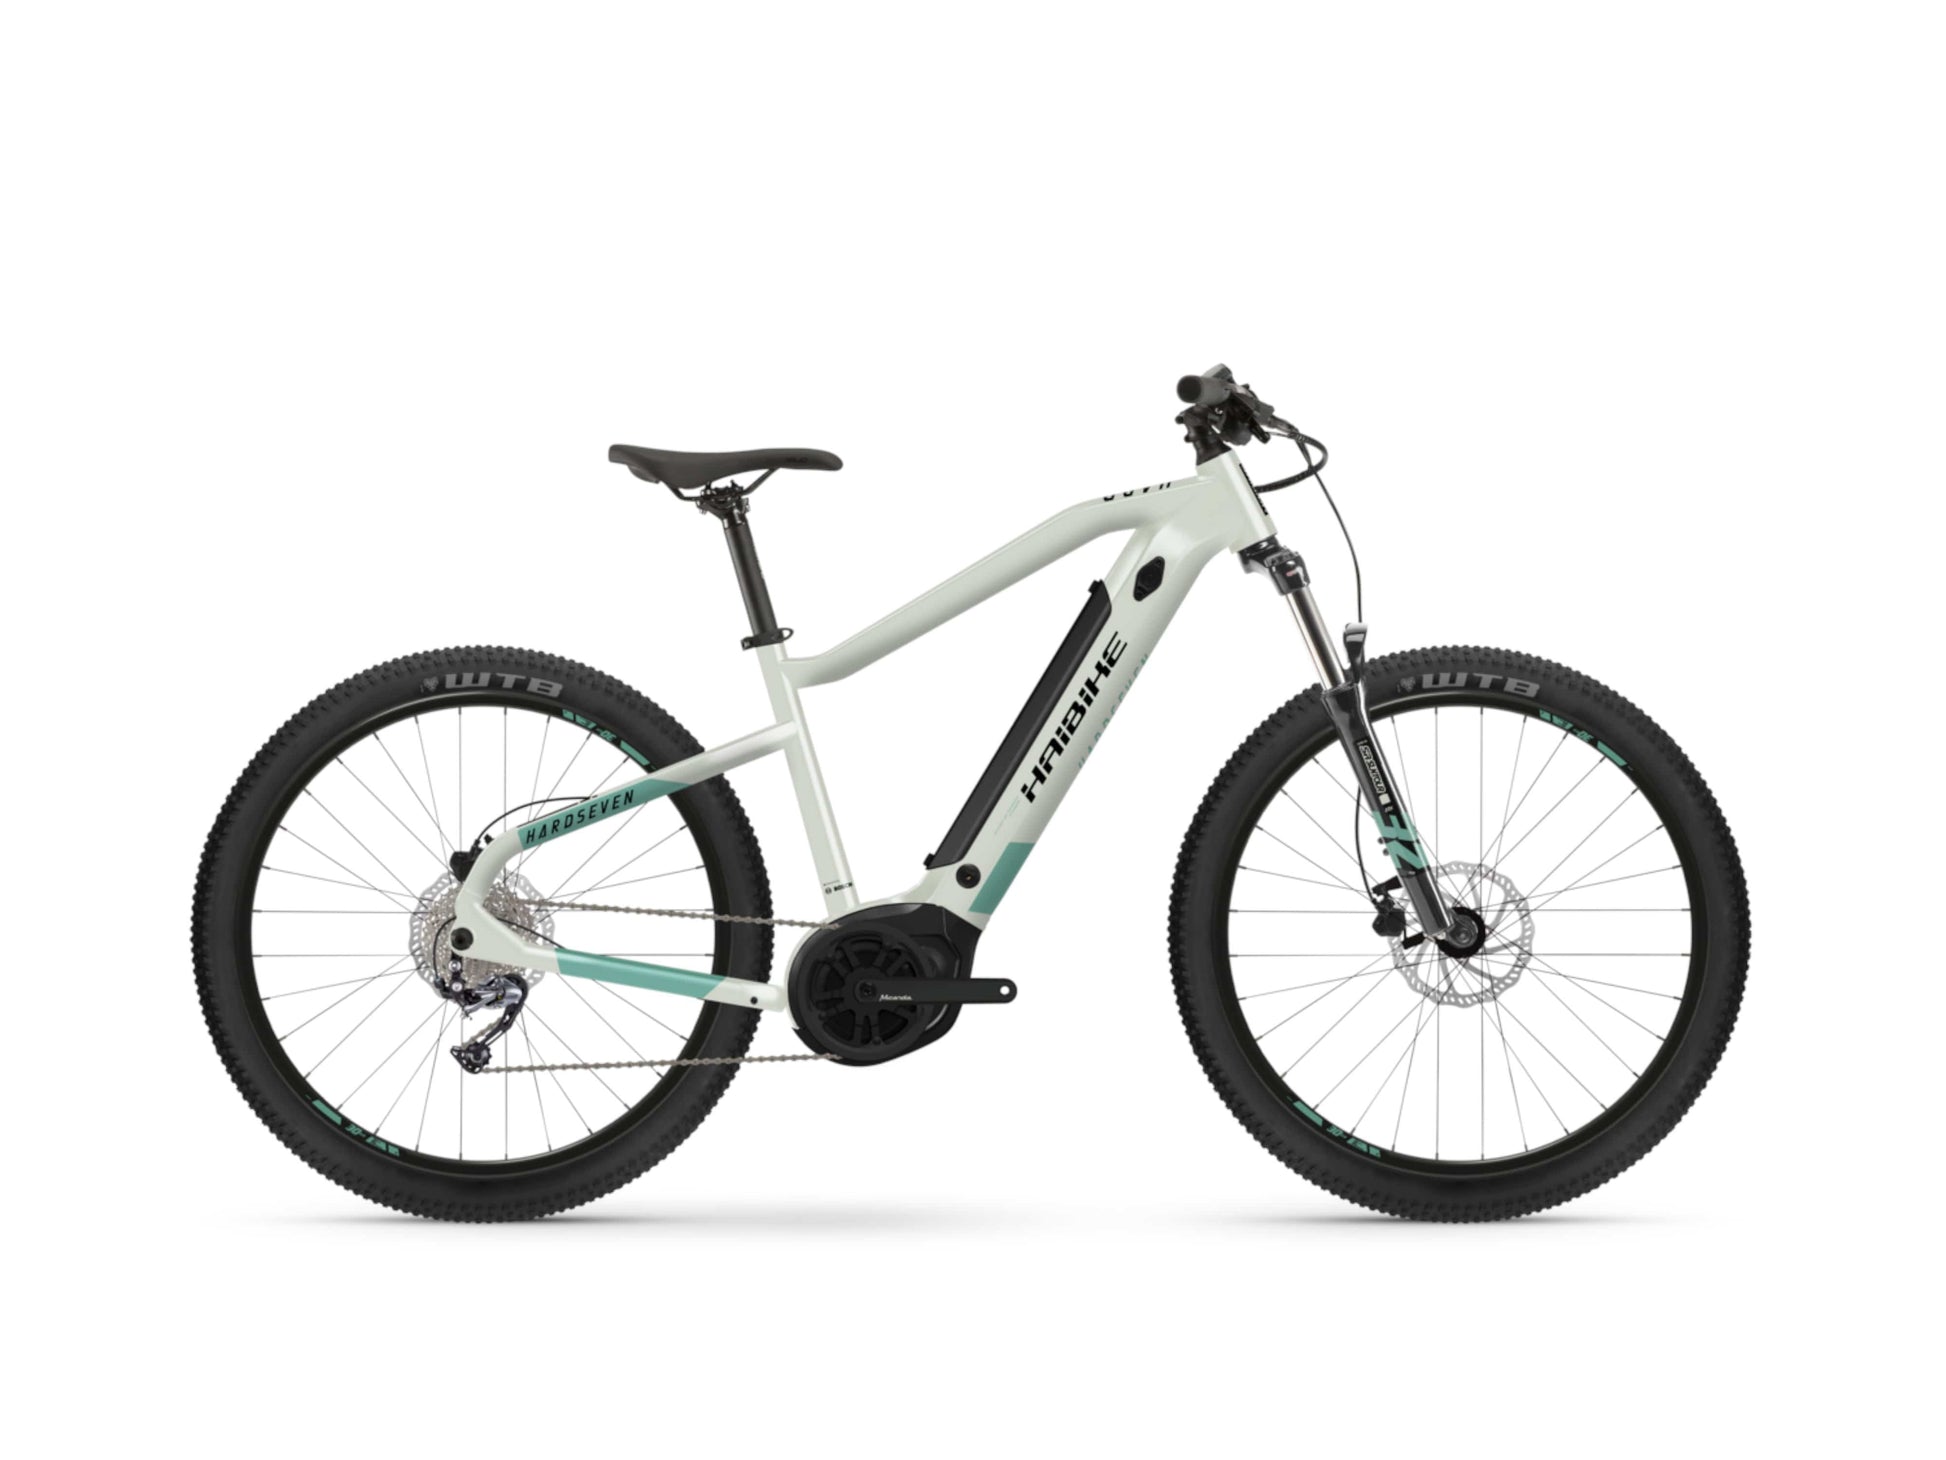 Haibike HardNine 5 For Sale  Fly Rides USA – Fly Rides USA